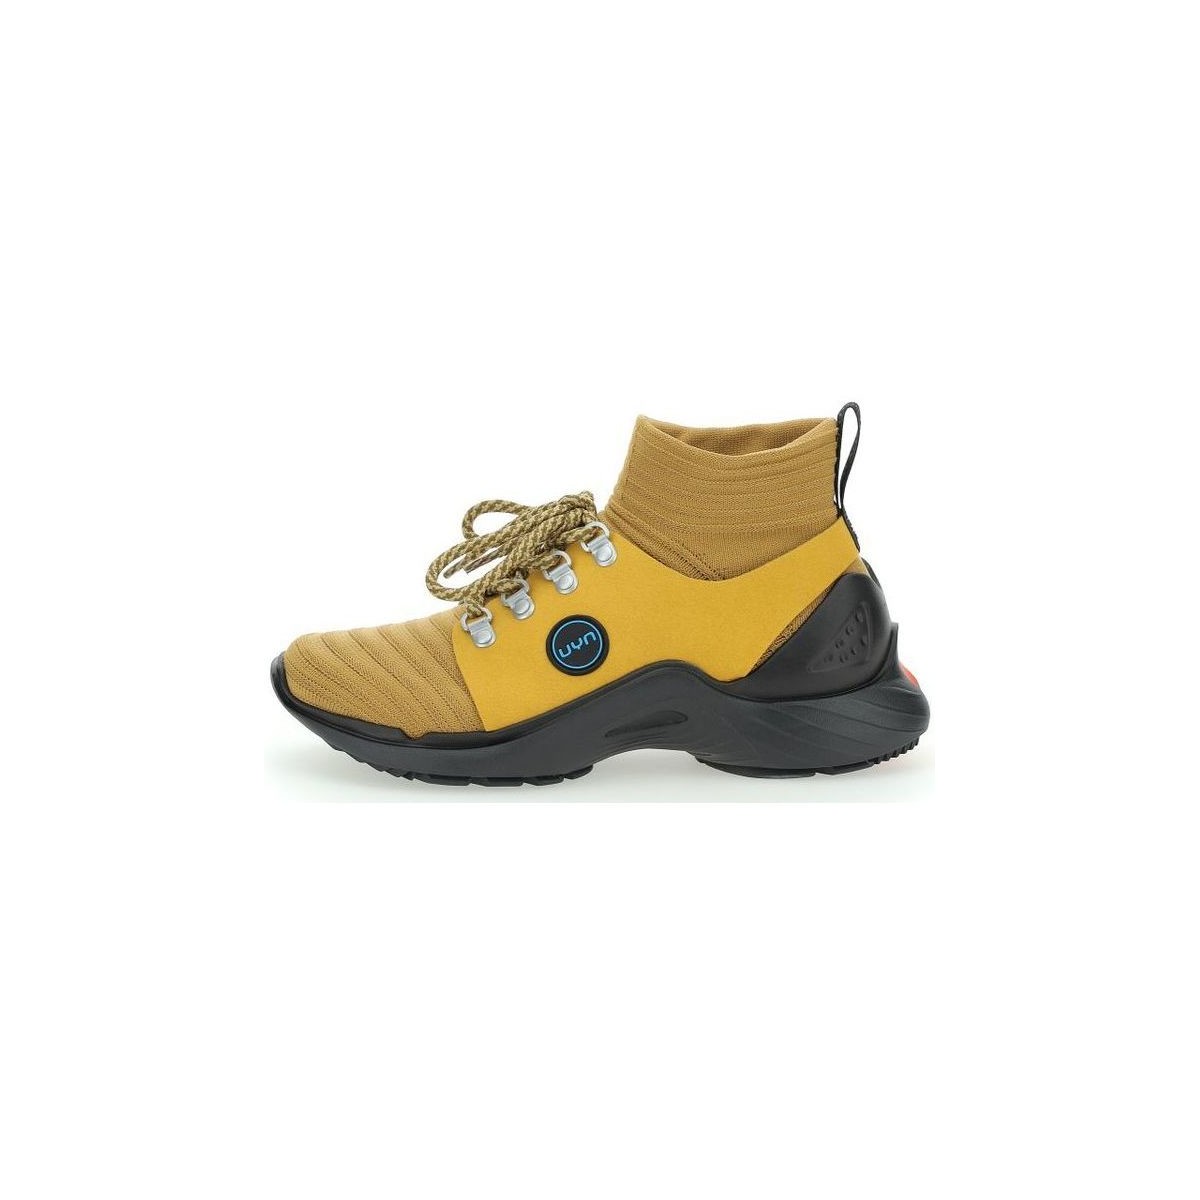 Chaussures Homme Multisport Uyn HIMALAYA 6000 BOOT MID BLACK SOLE Jaune